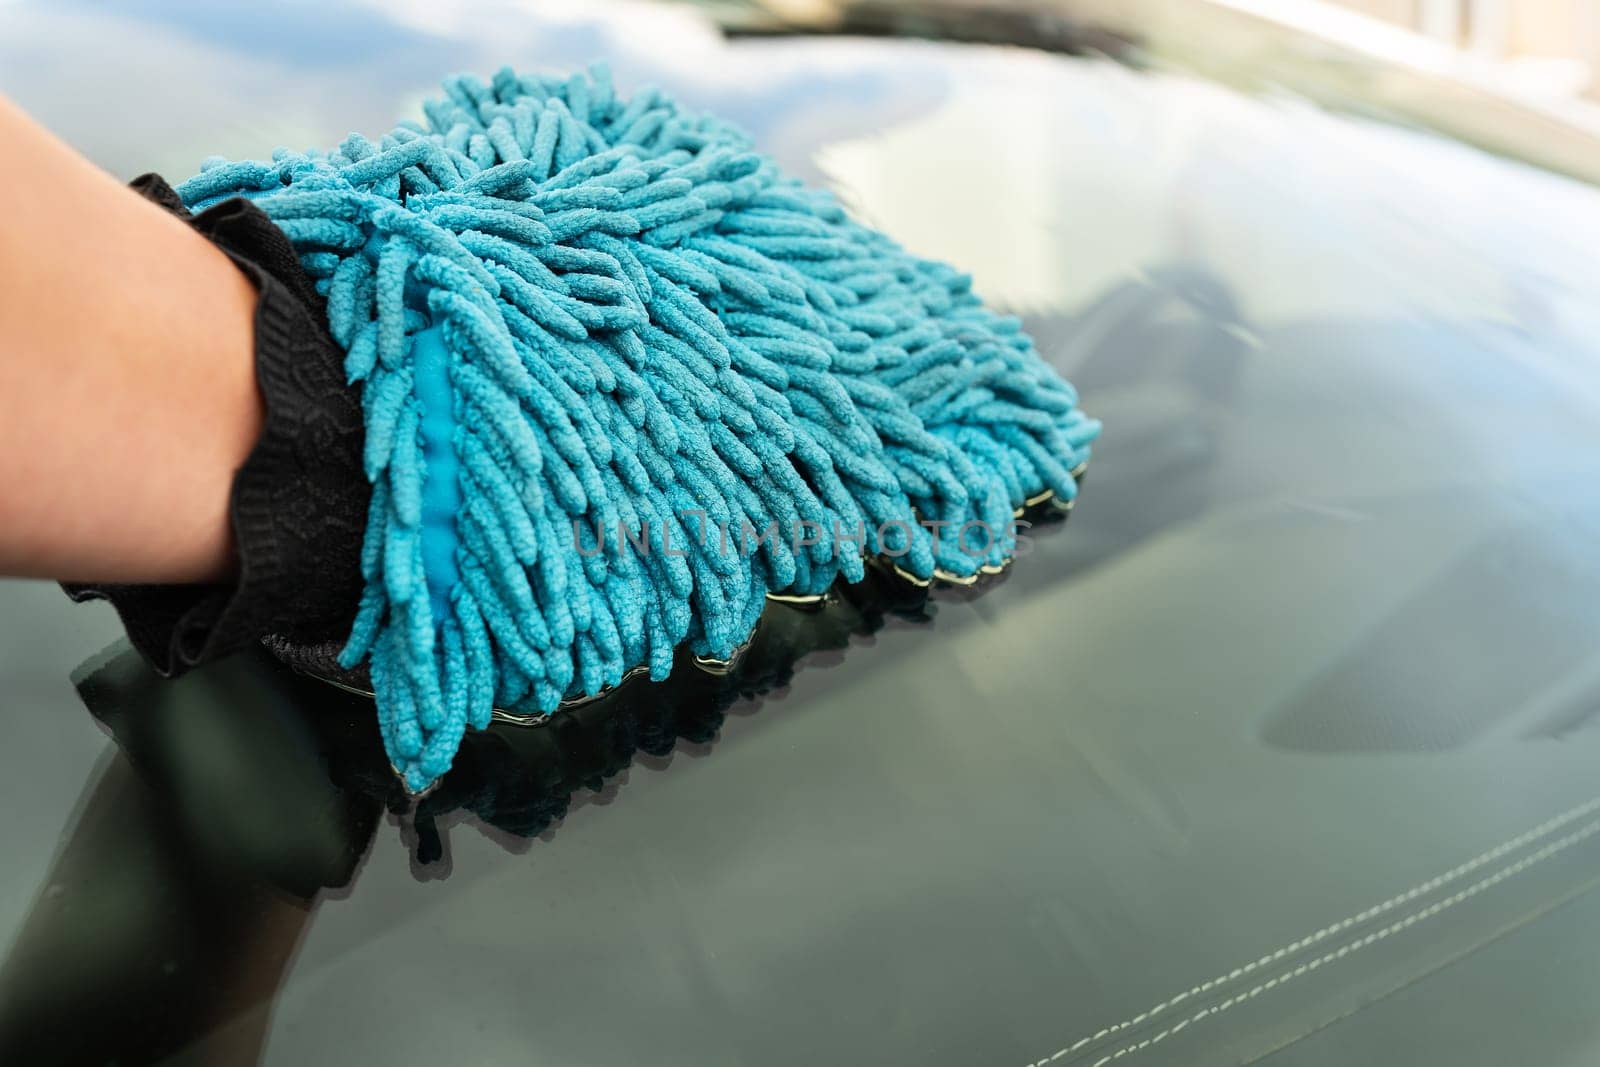 Car wash and self-service concept. A man washes the car windshield with a large blue washcloth. by sfinks